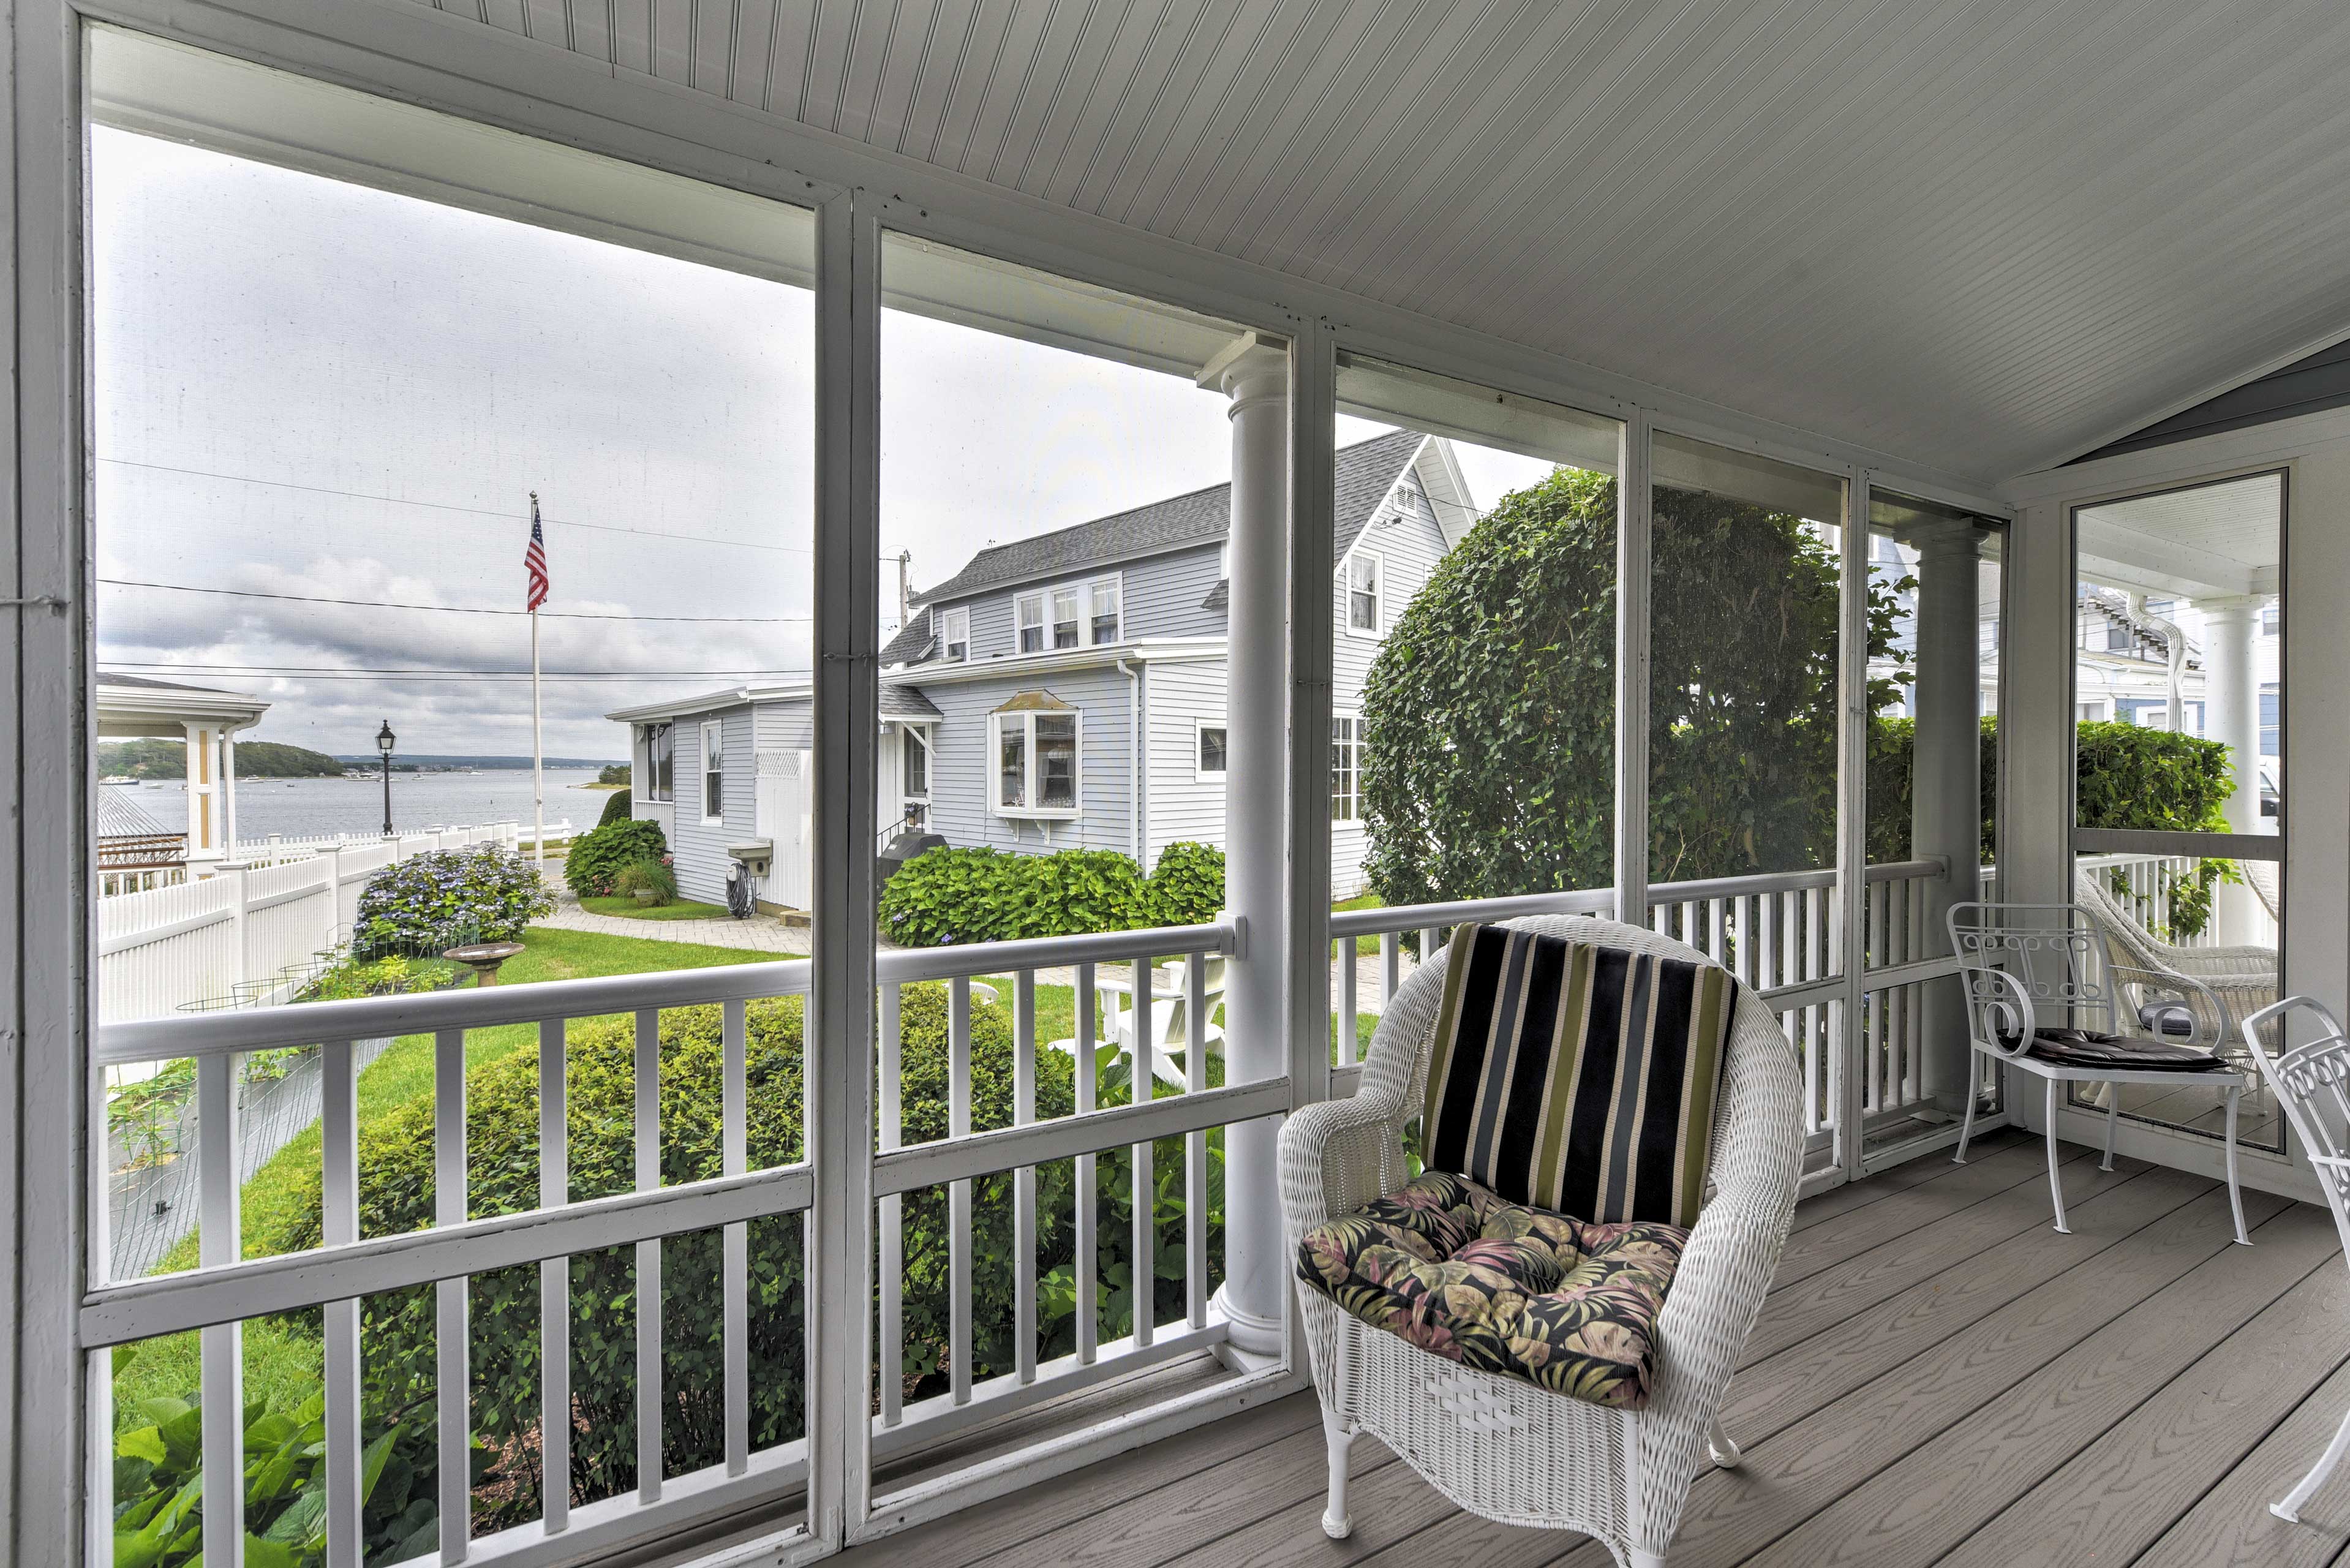 You'll love lounging on the porch overlooking Onset Bay.